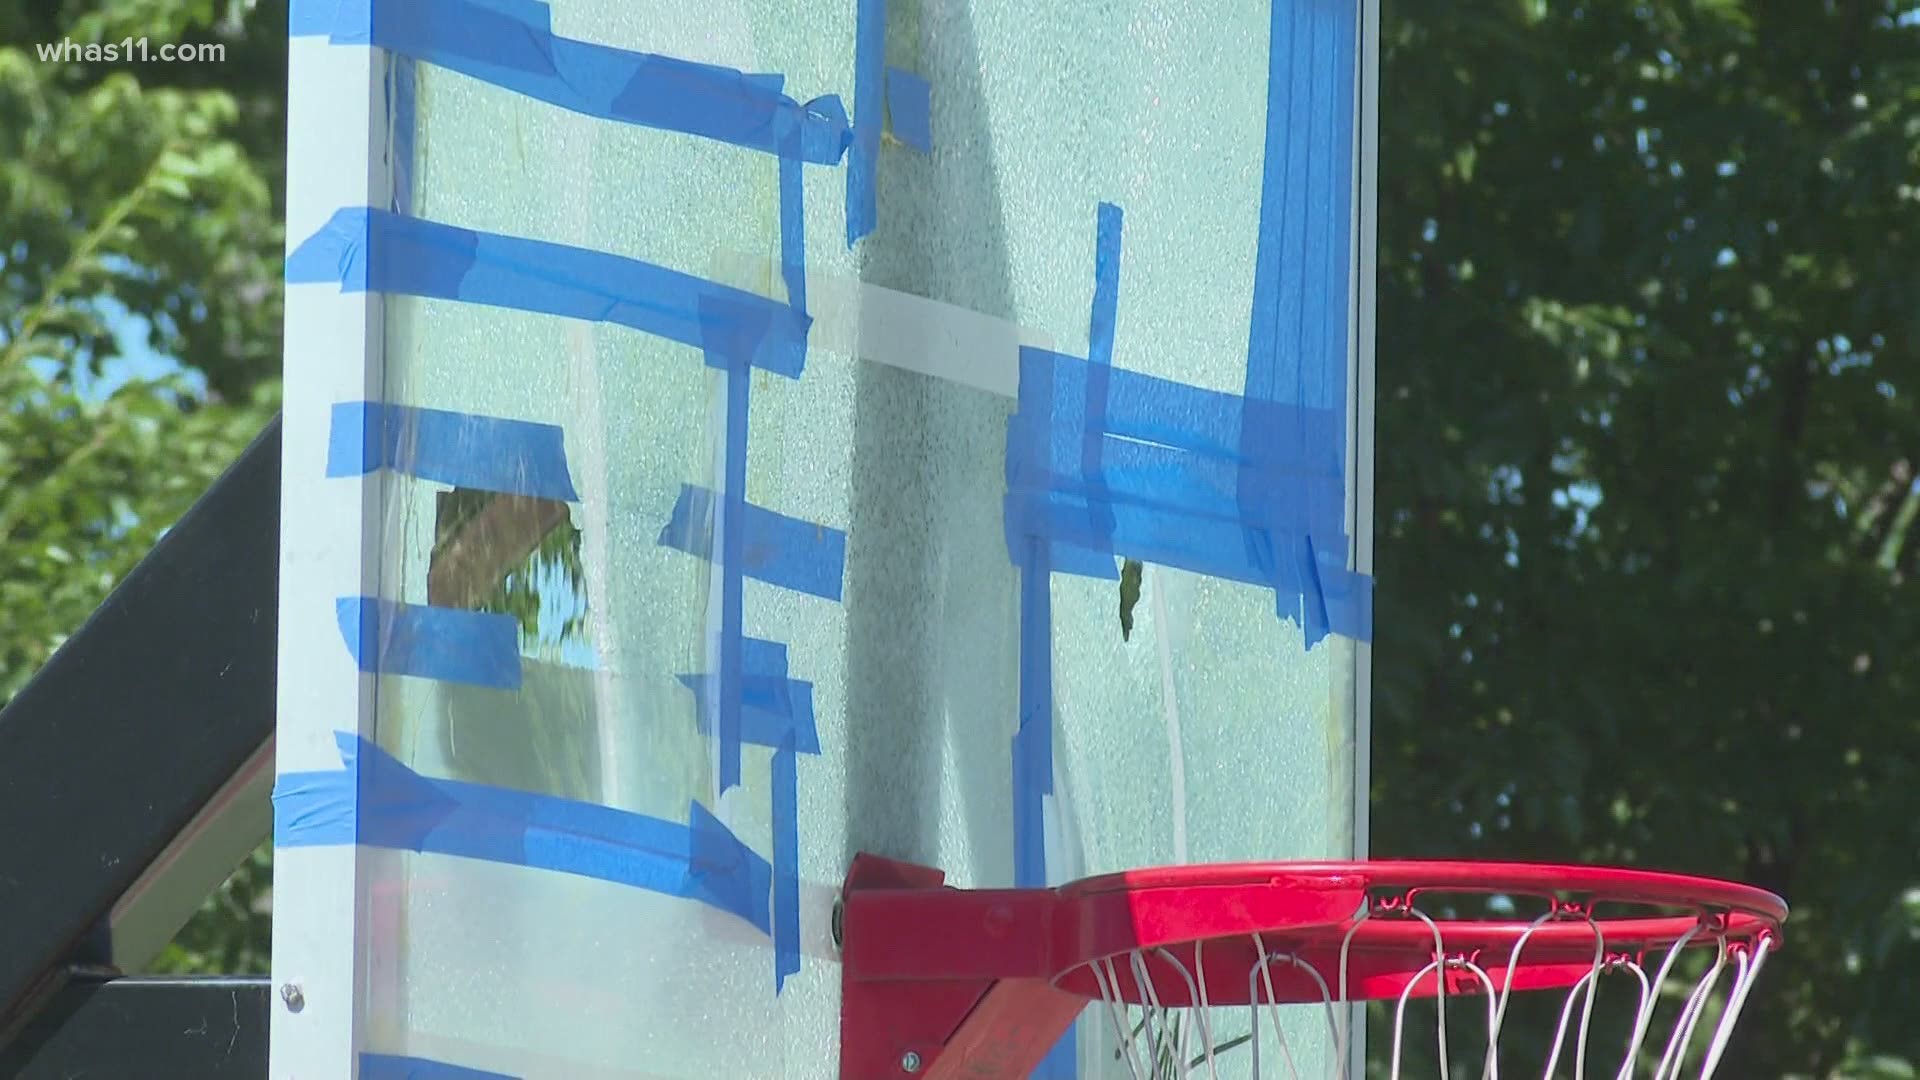 Neighbors in a Louisville neighborhood are asking for the community’s help after someone vandalized renovated basketball goals in Wyandotte Park.